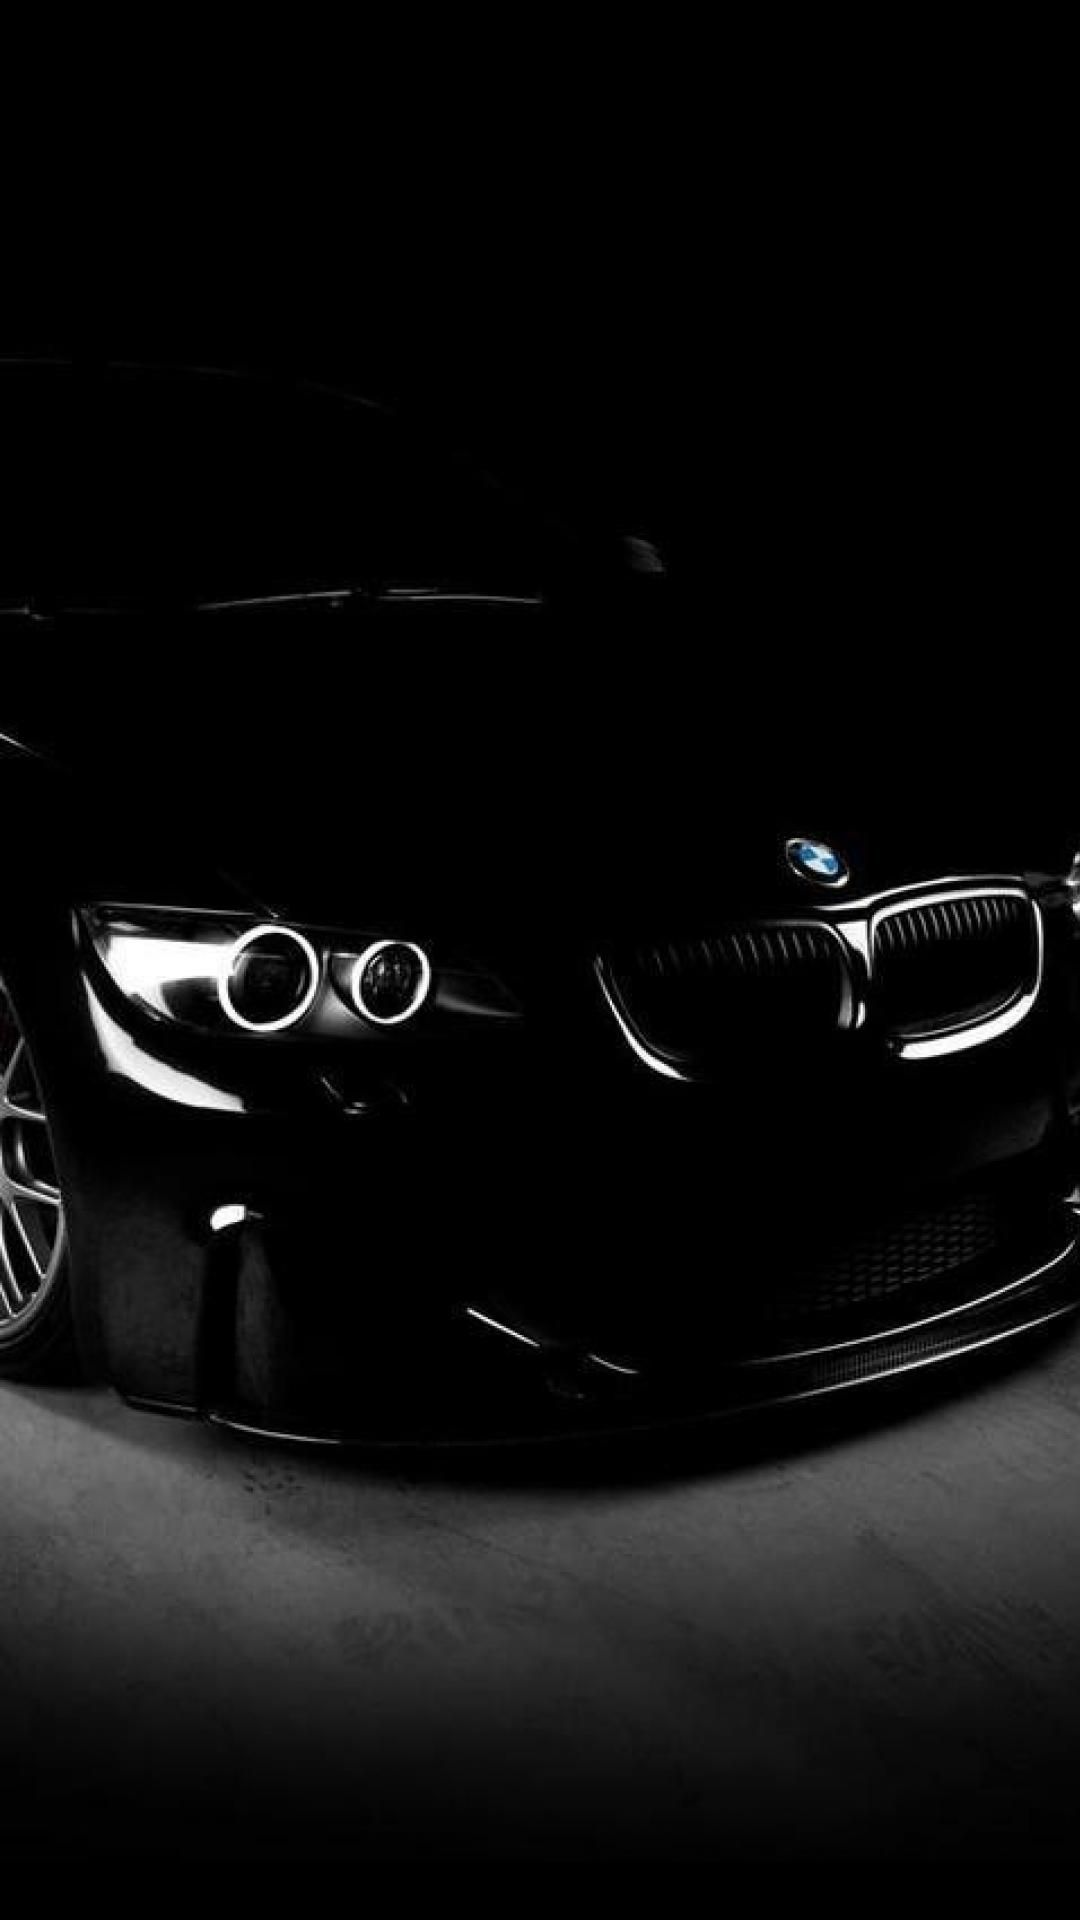 Bmw Amoled Wallpapers Wallpaper Cave